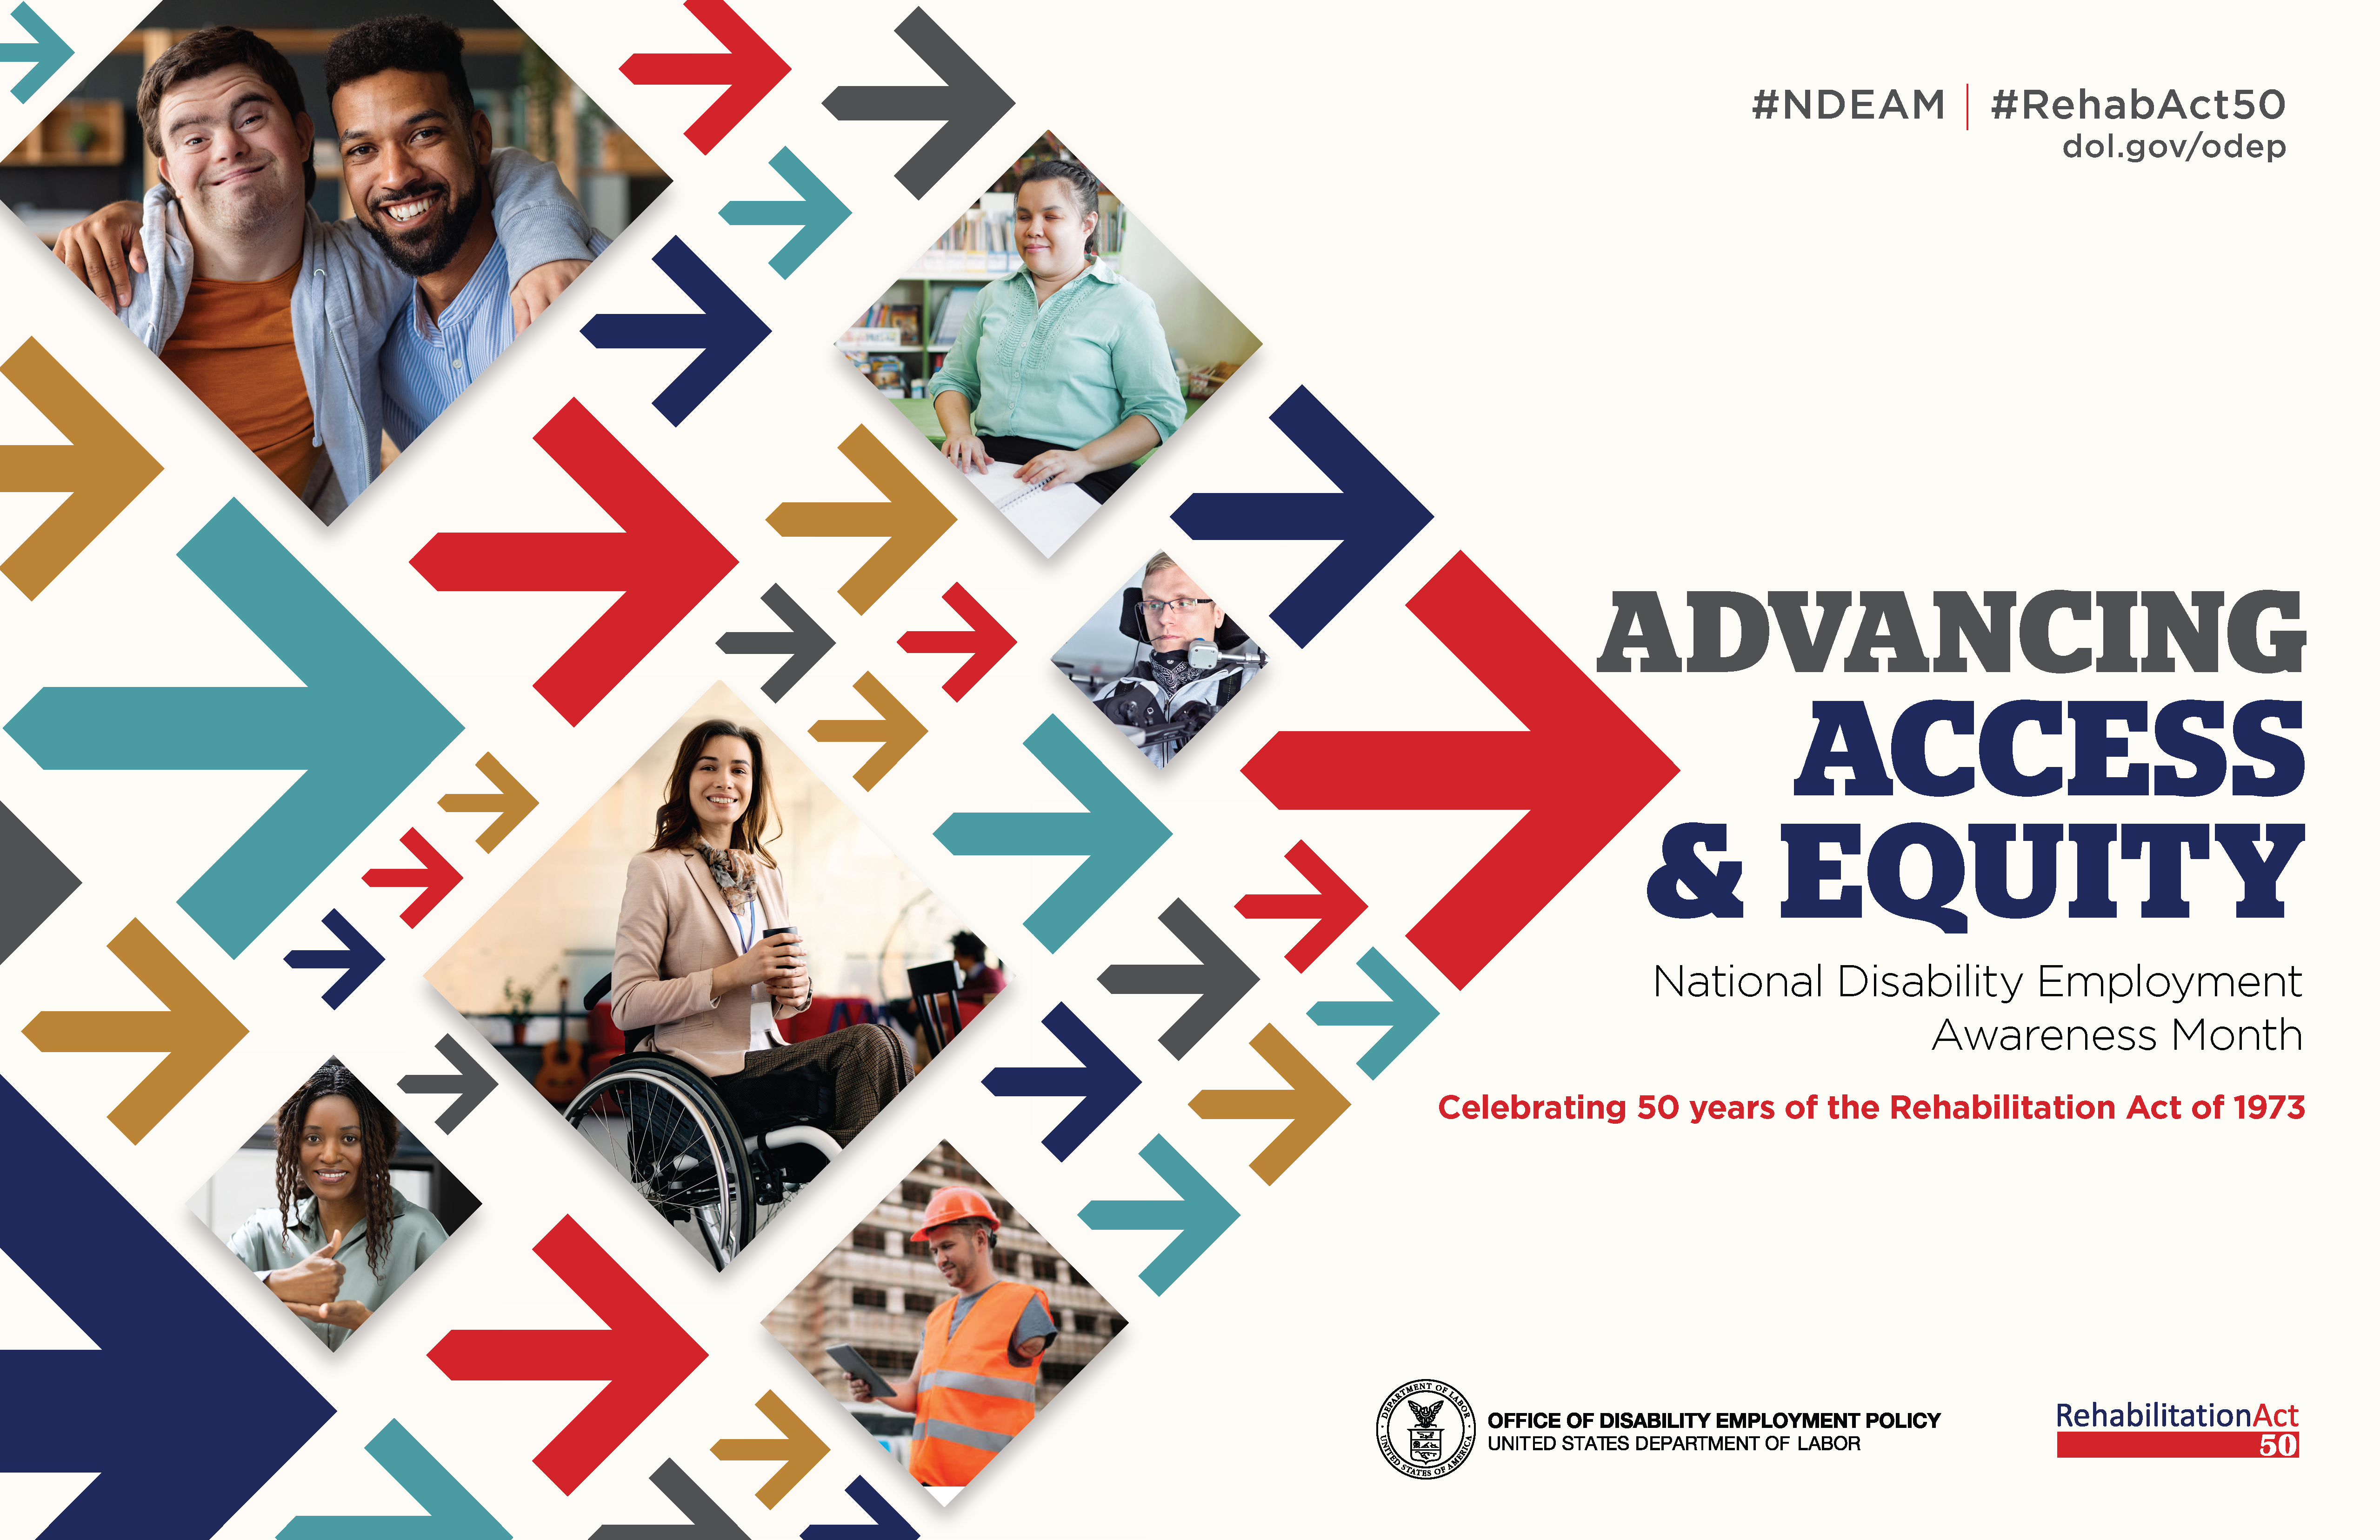 Collage of arrows in various colors pointing forward. The poster reads “Advancing Access & Equity, National Disability Employment Awareness Month, Celebrating 50 years of the Rehabilitation Act of 1973.” Also says #NDEAM and #RehabAct50” and dol.gov/ODEP and includes DOL seal and ODEP and Rehabilitation Act 50 logos.